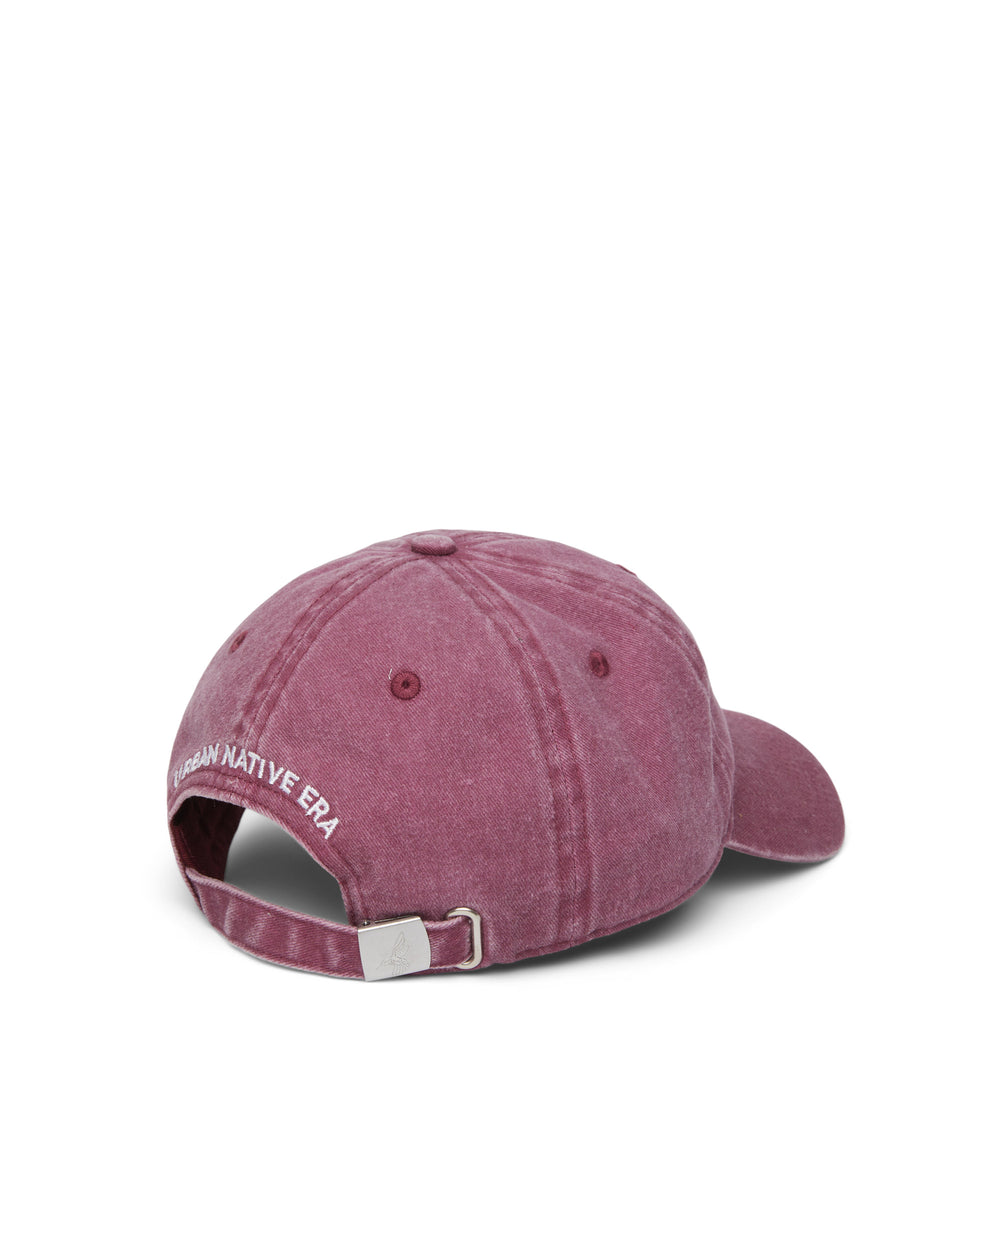 'YOU ARE ON NATIVE LAND DAD CAP - MAROON